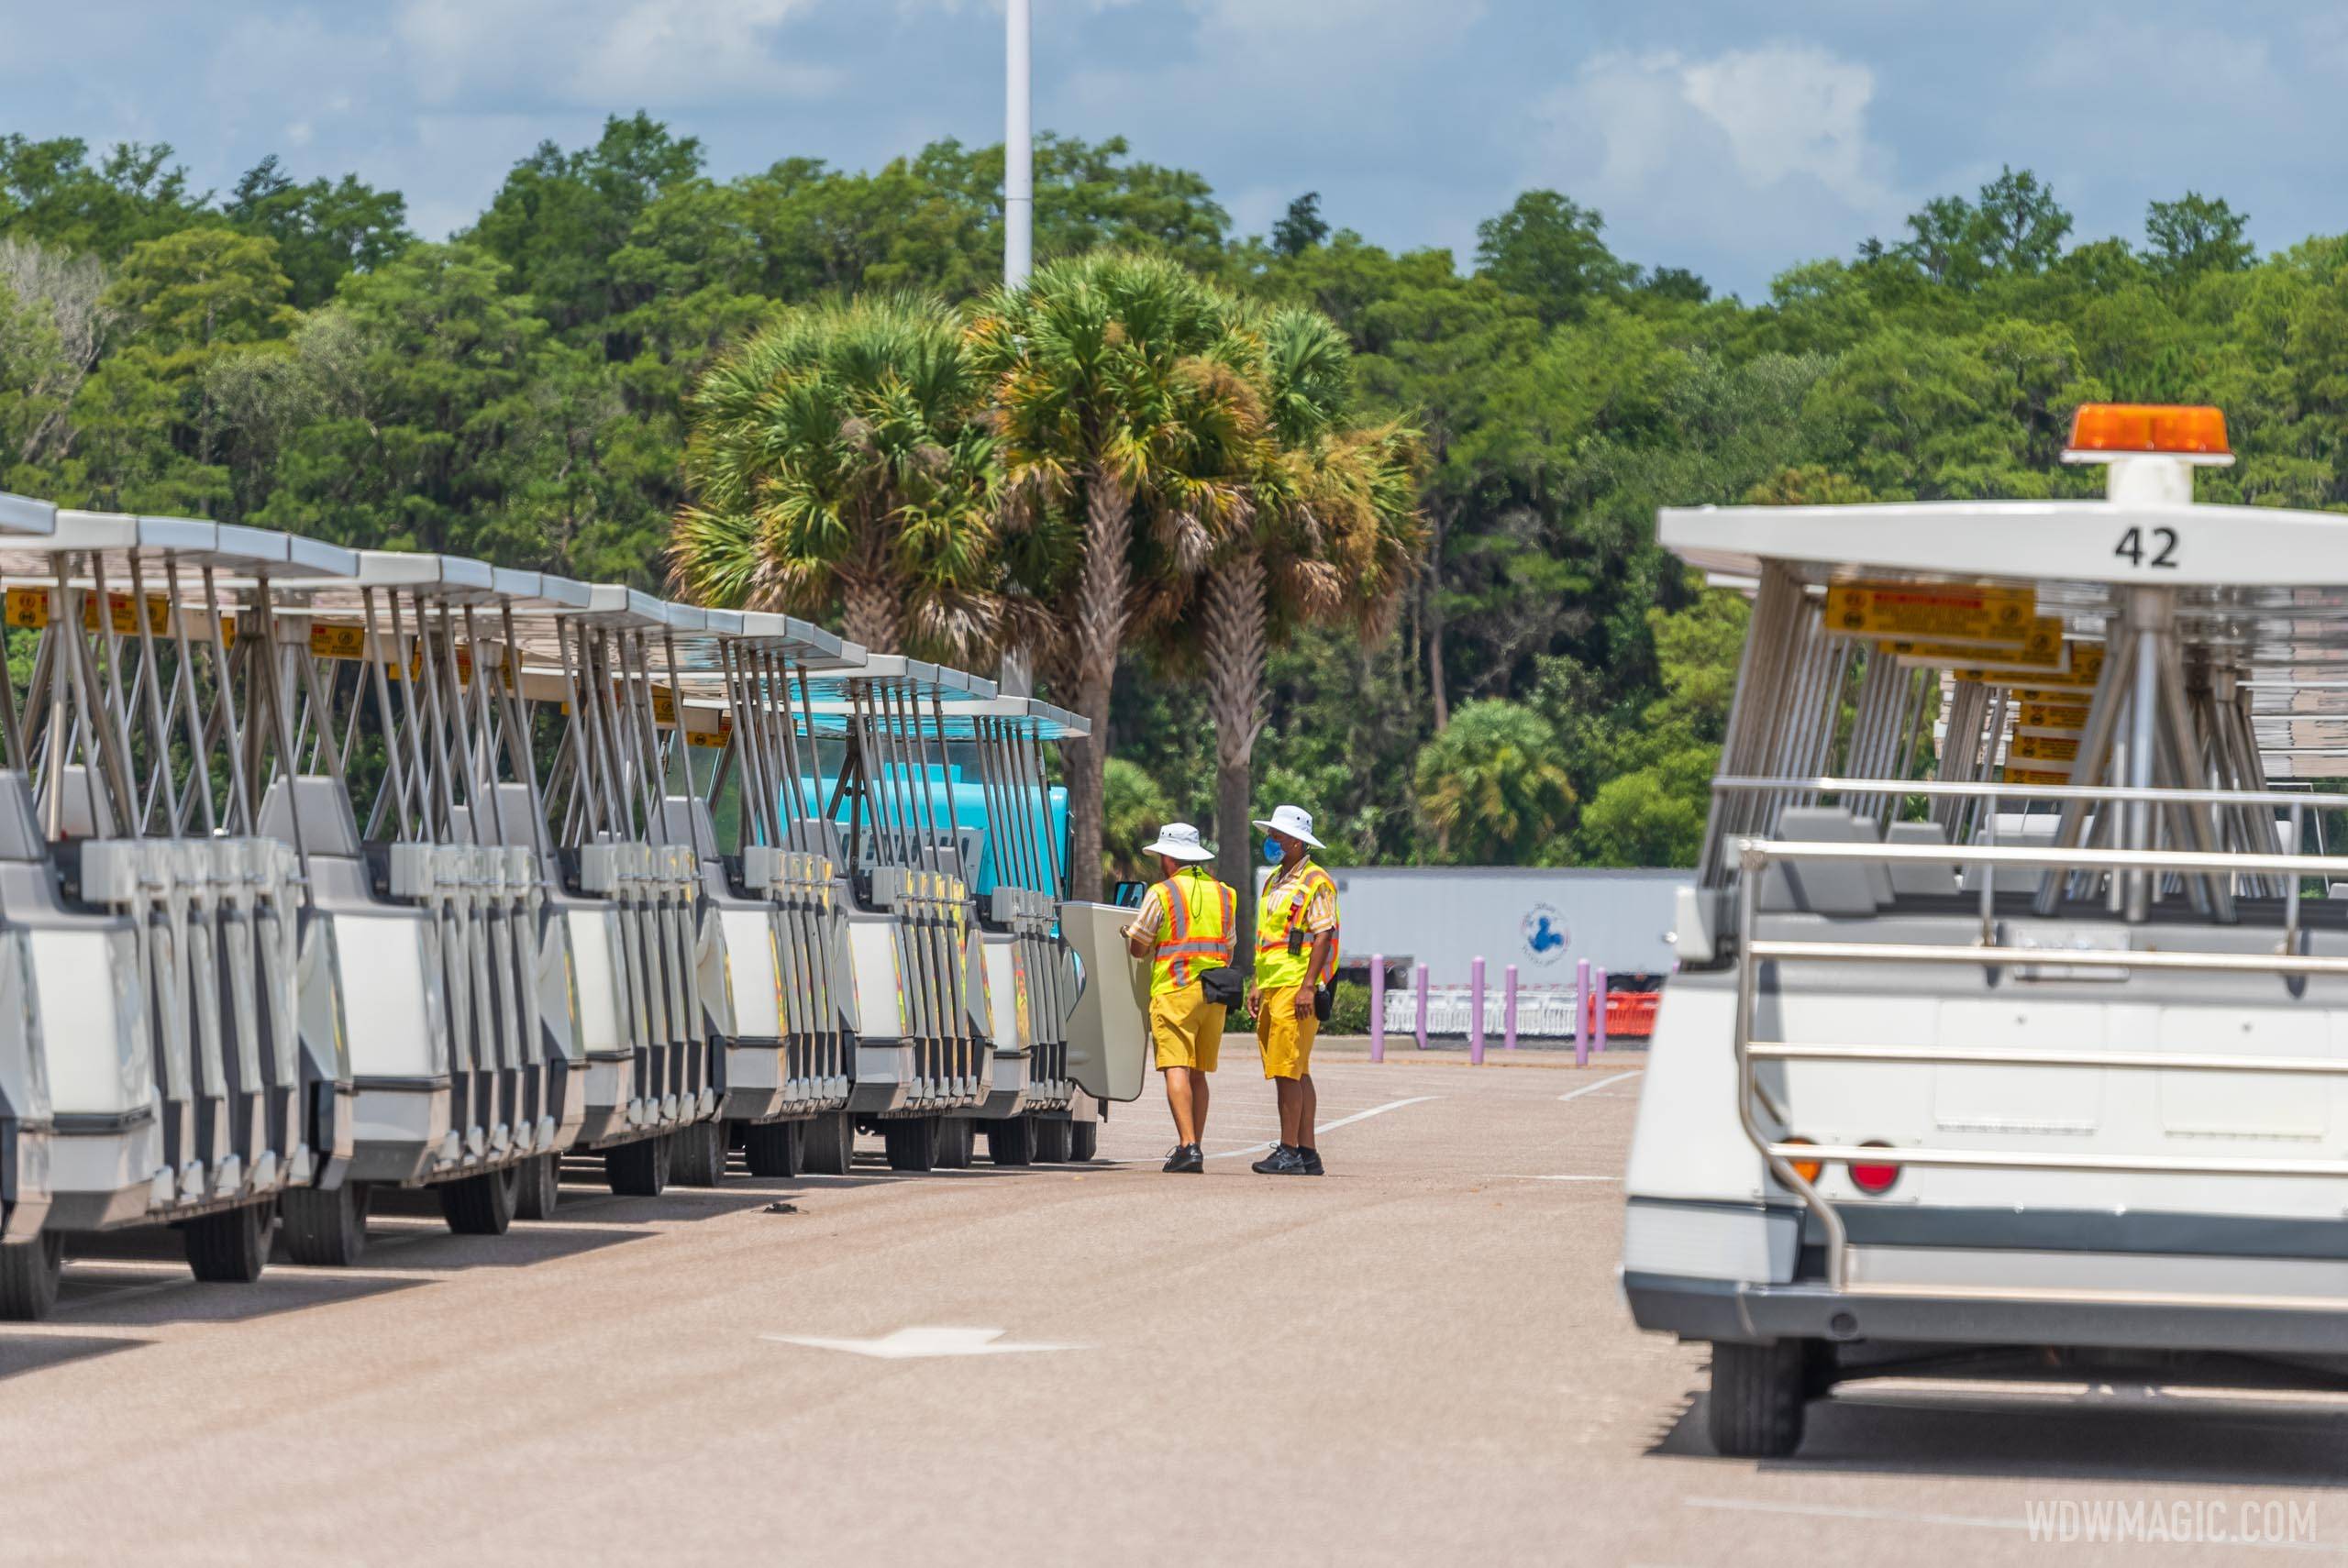 Parking lot trams to finally return to service at all four Walt Disney World theme parks